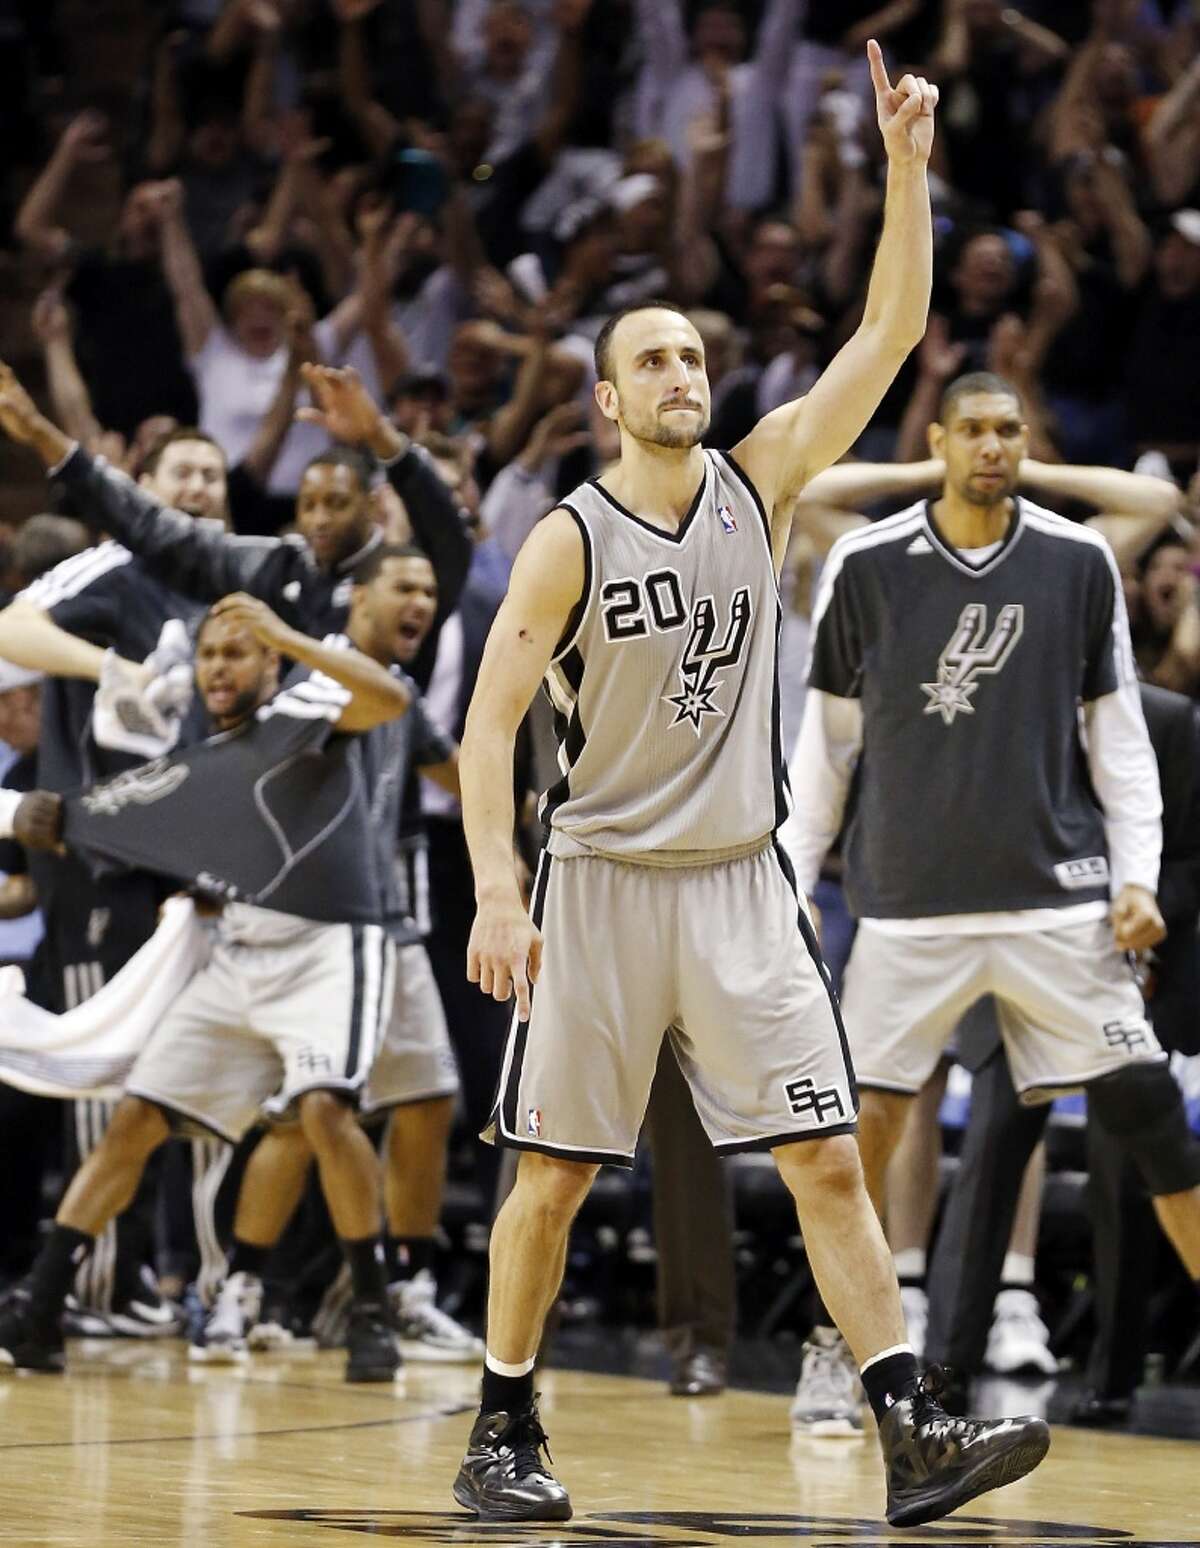 San Antonio Spurs' Manu Ginobili reacts after making a 3-pointer late in double overtime of Game 1 in the NBA Western Conference semifinals against the Golden State Warriors Monday May 6, 2013 at the AT&T Center. The Spurs won 129-127 in double overtime.